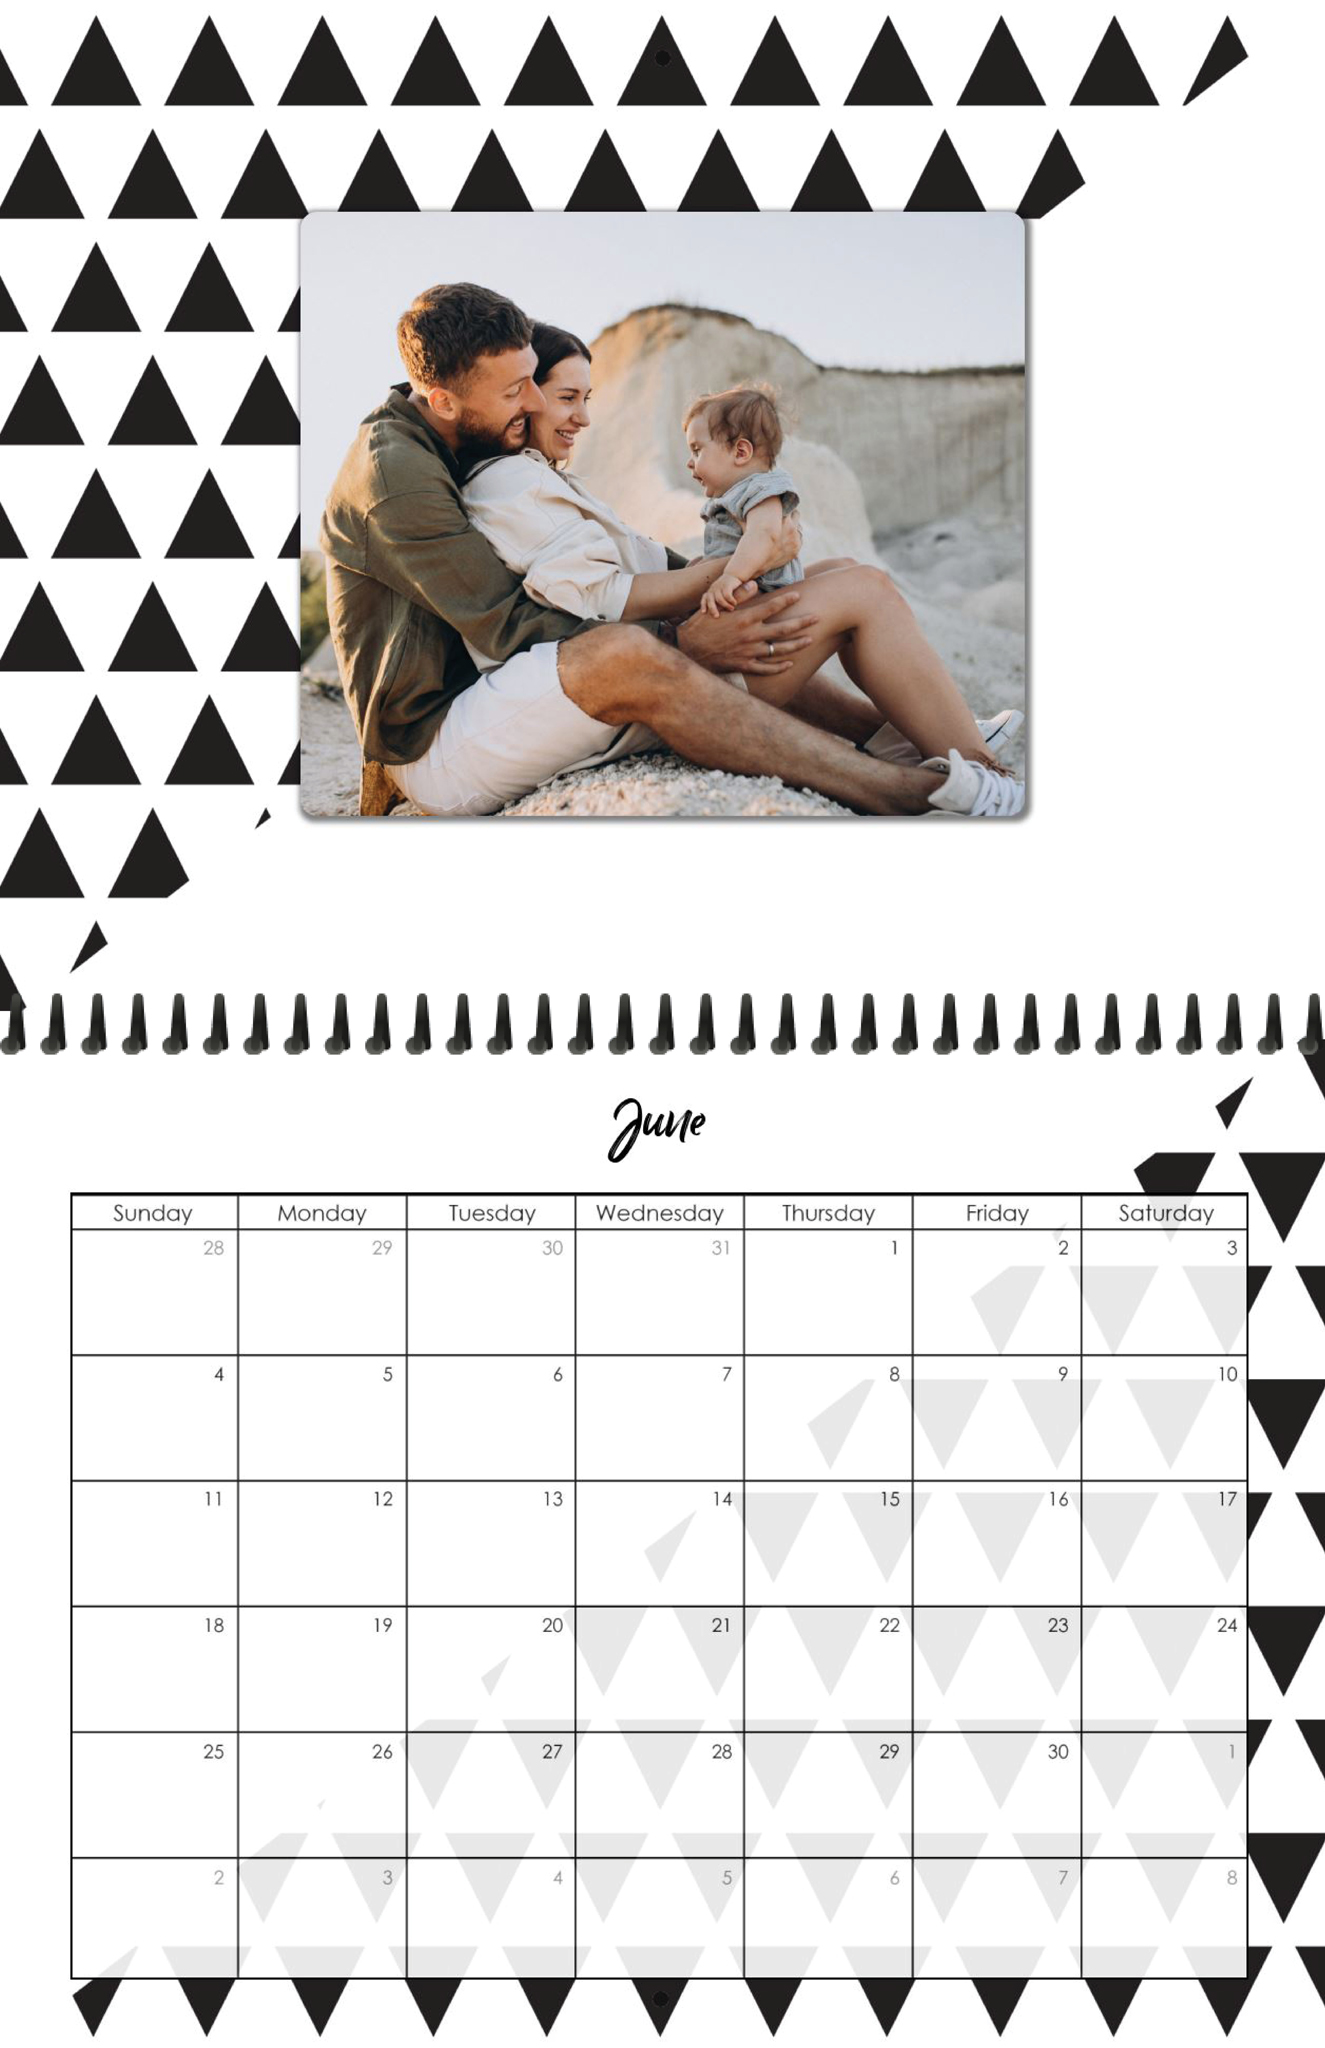 Wall Calendar Patterned Triangles 11x8.5 06